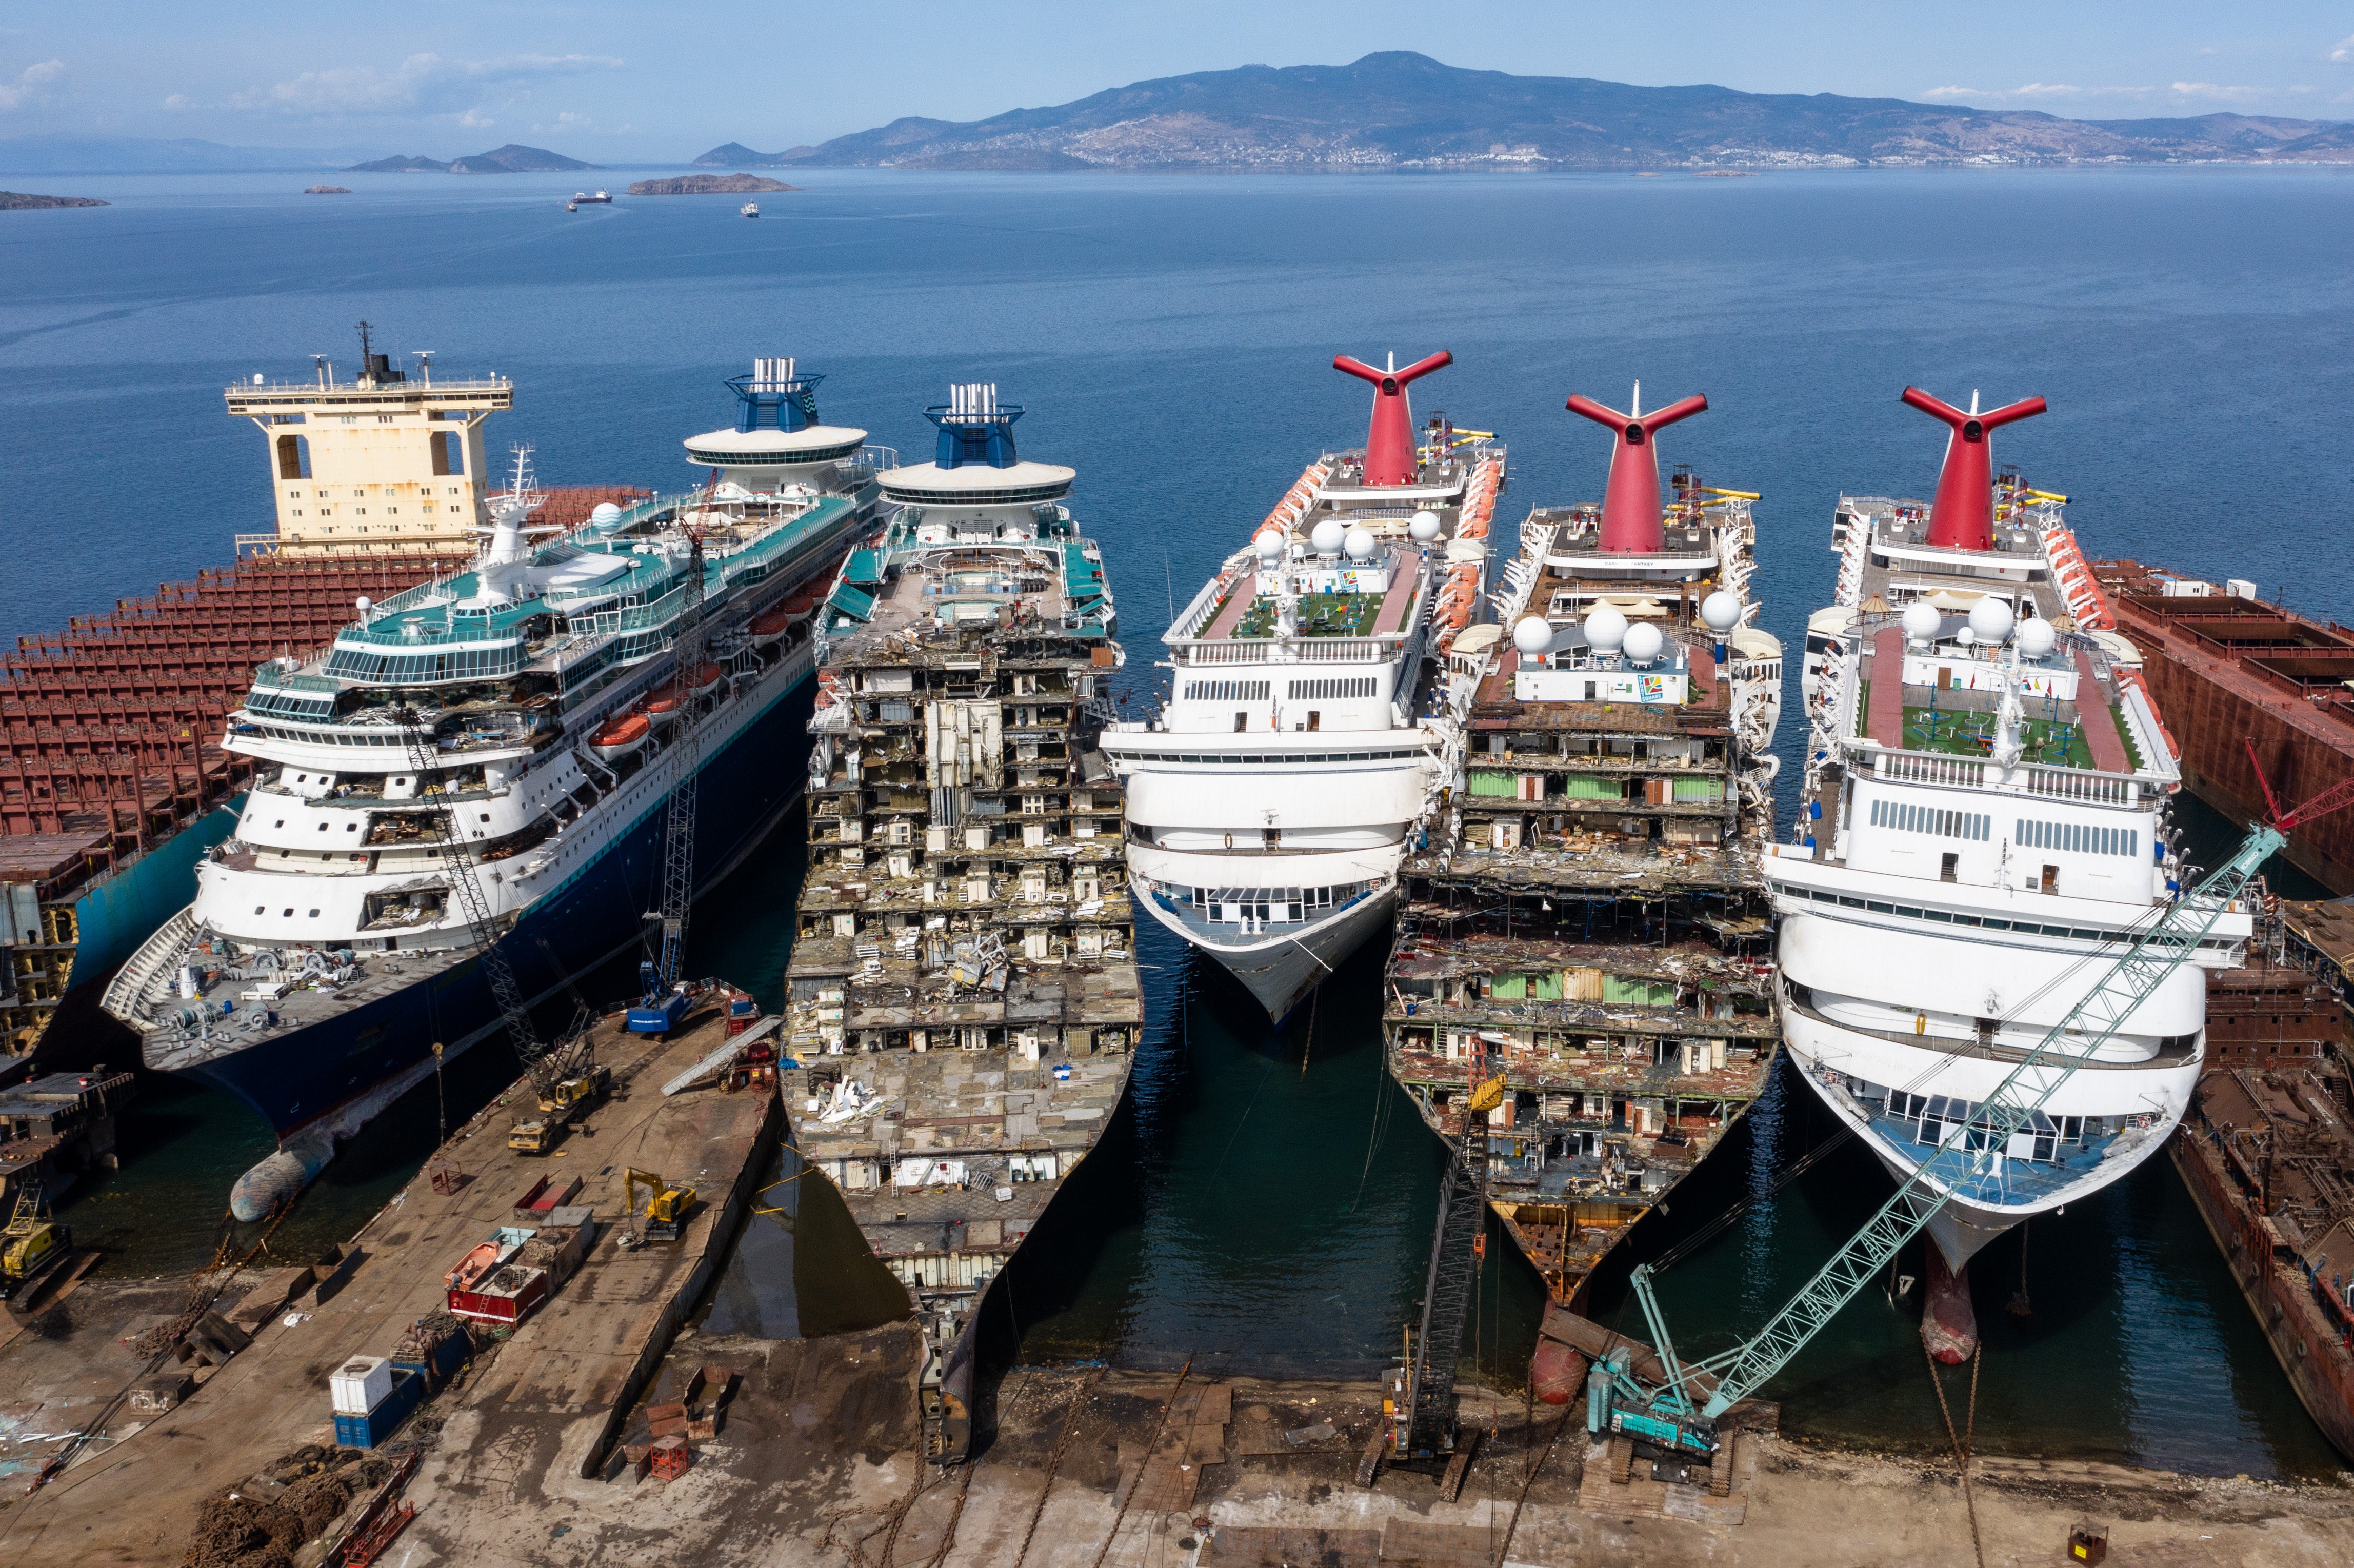 Luxury cruise ships being scrapped in Izmir, Turkey. With the pandemic pushing the multi-billion-dollar cruise industry into crisis, some operators have been forced to cut losses and retire ships earlier than planned